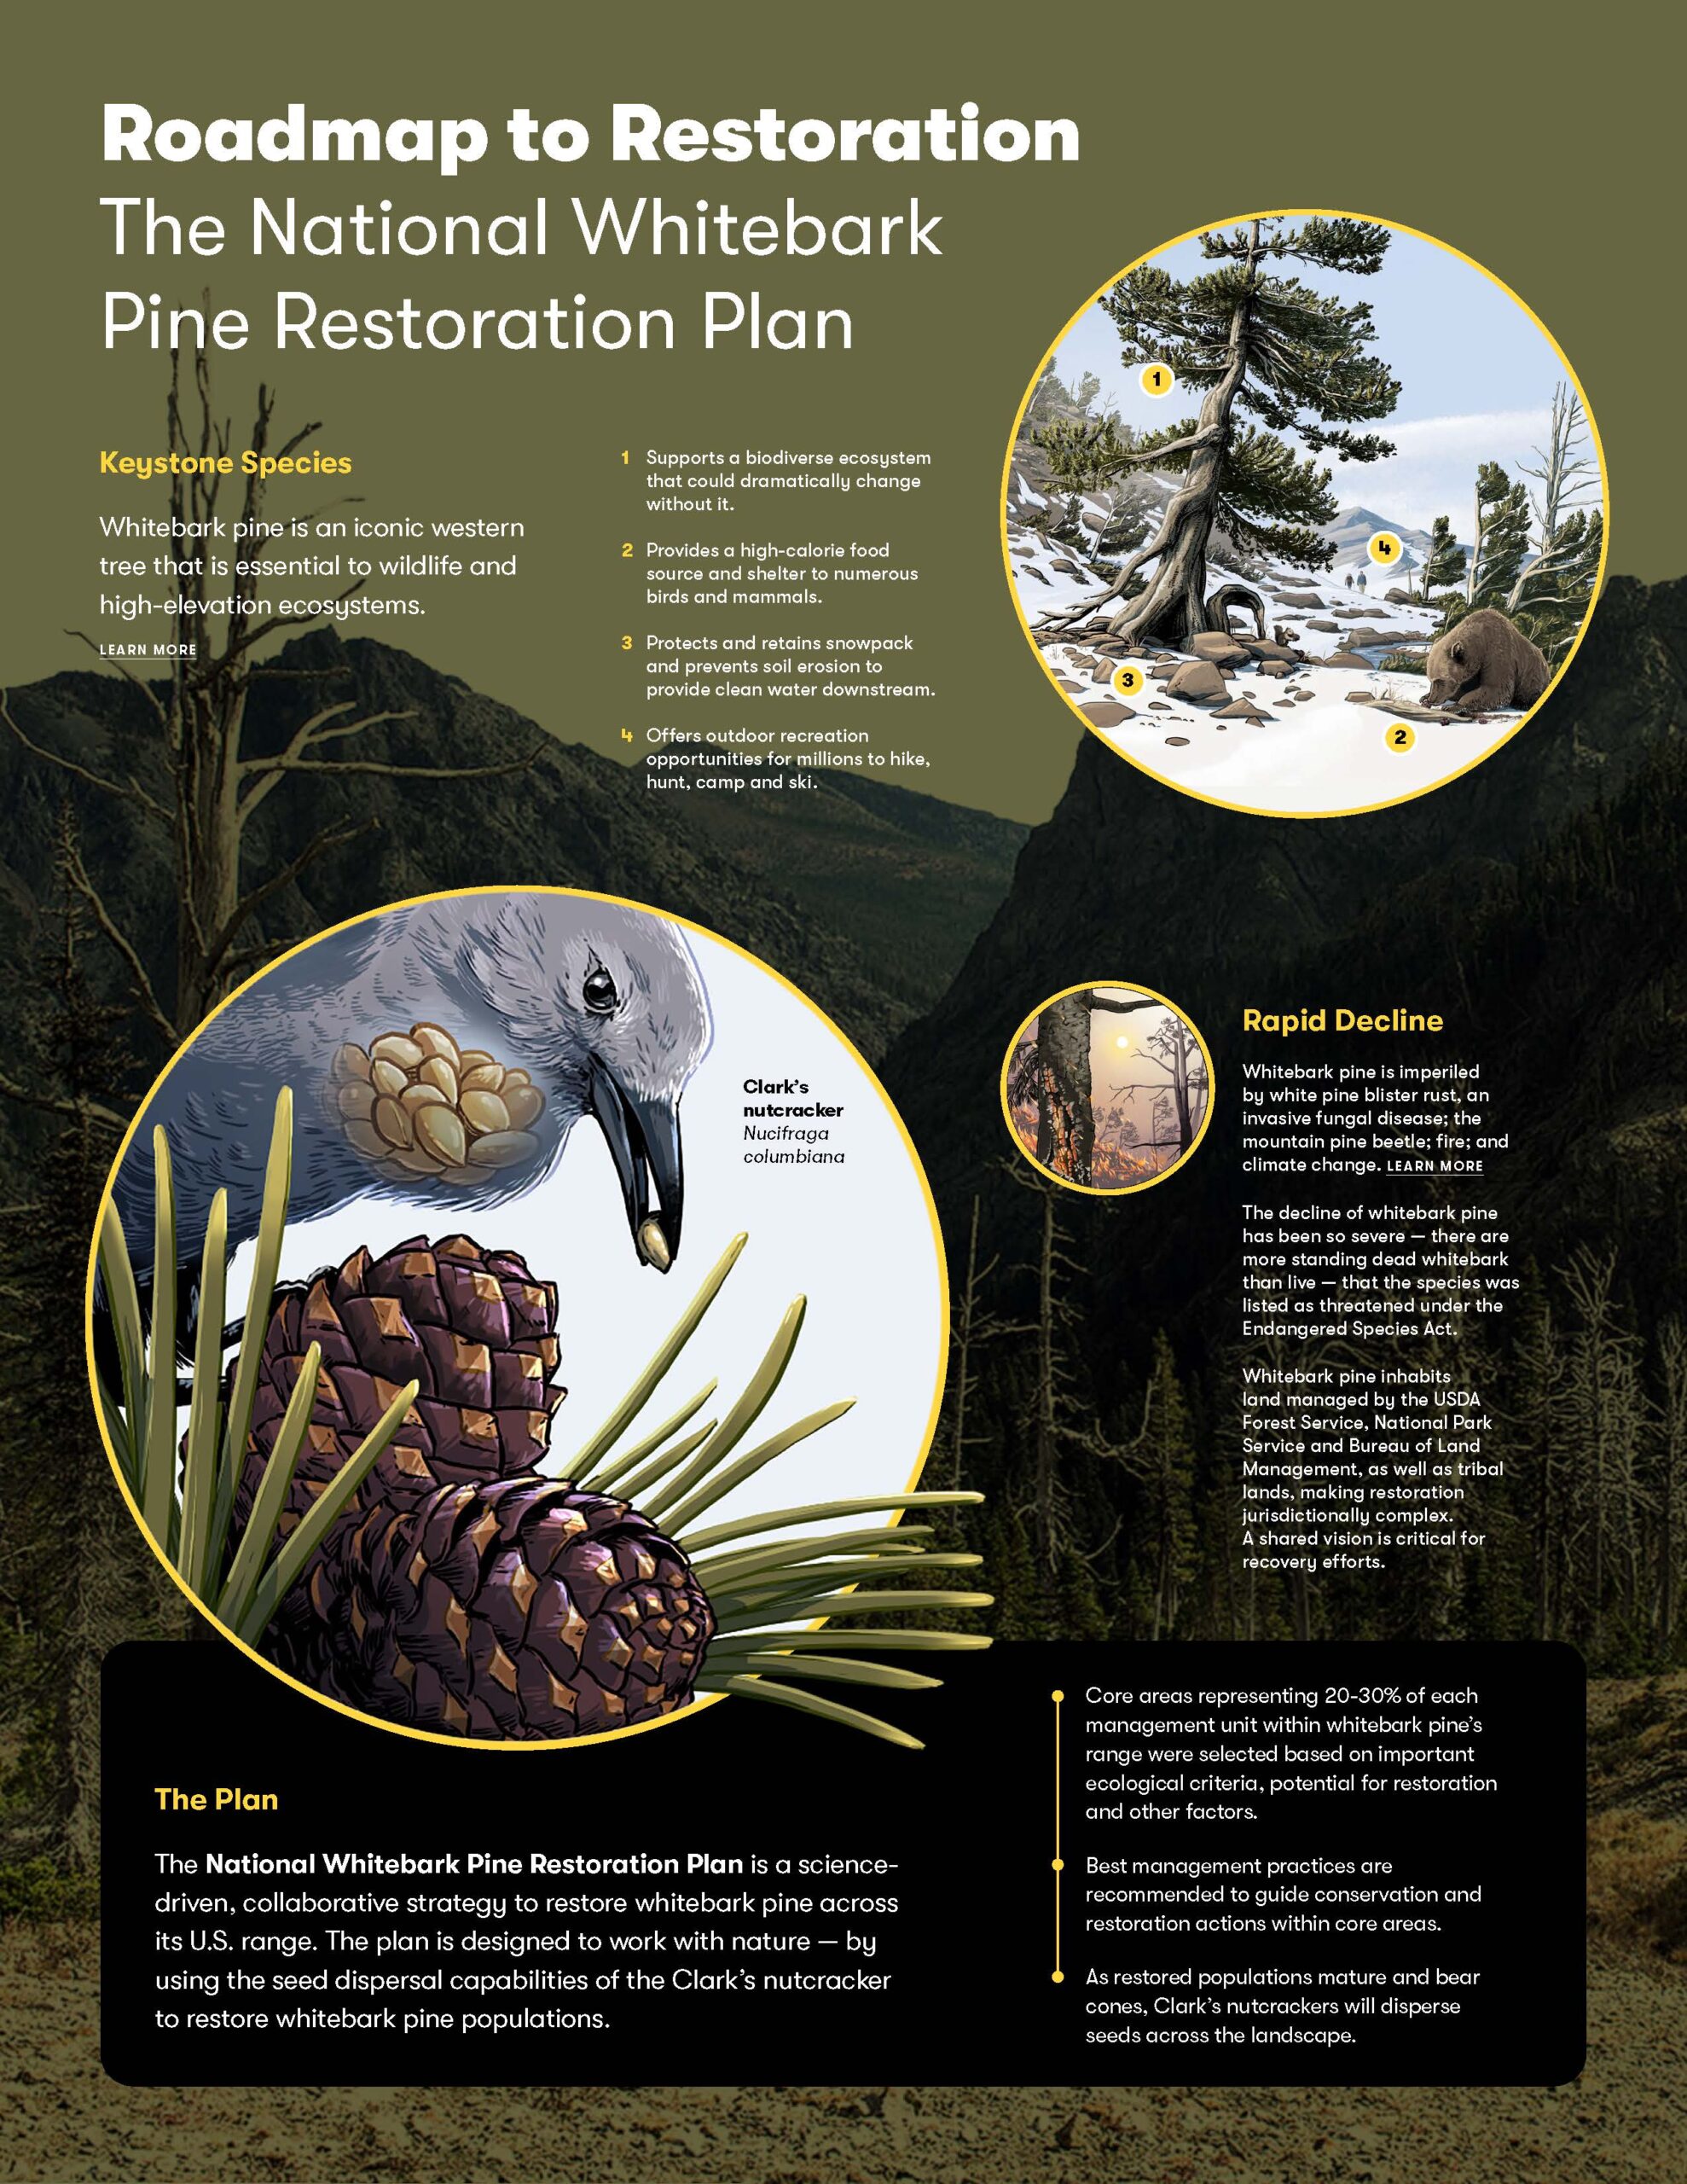 Whitebark pine trees added to Endangered Species list as 'threatened' –  Daily Montanan